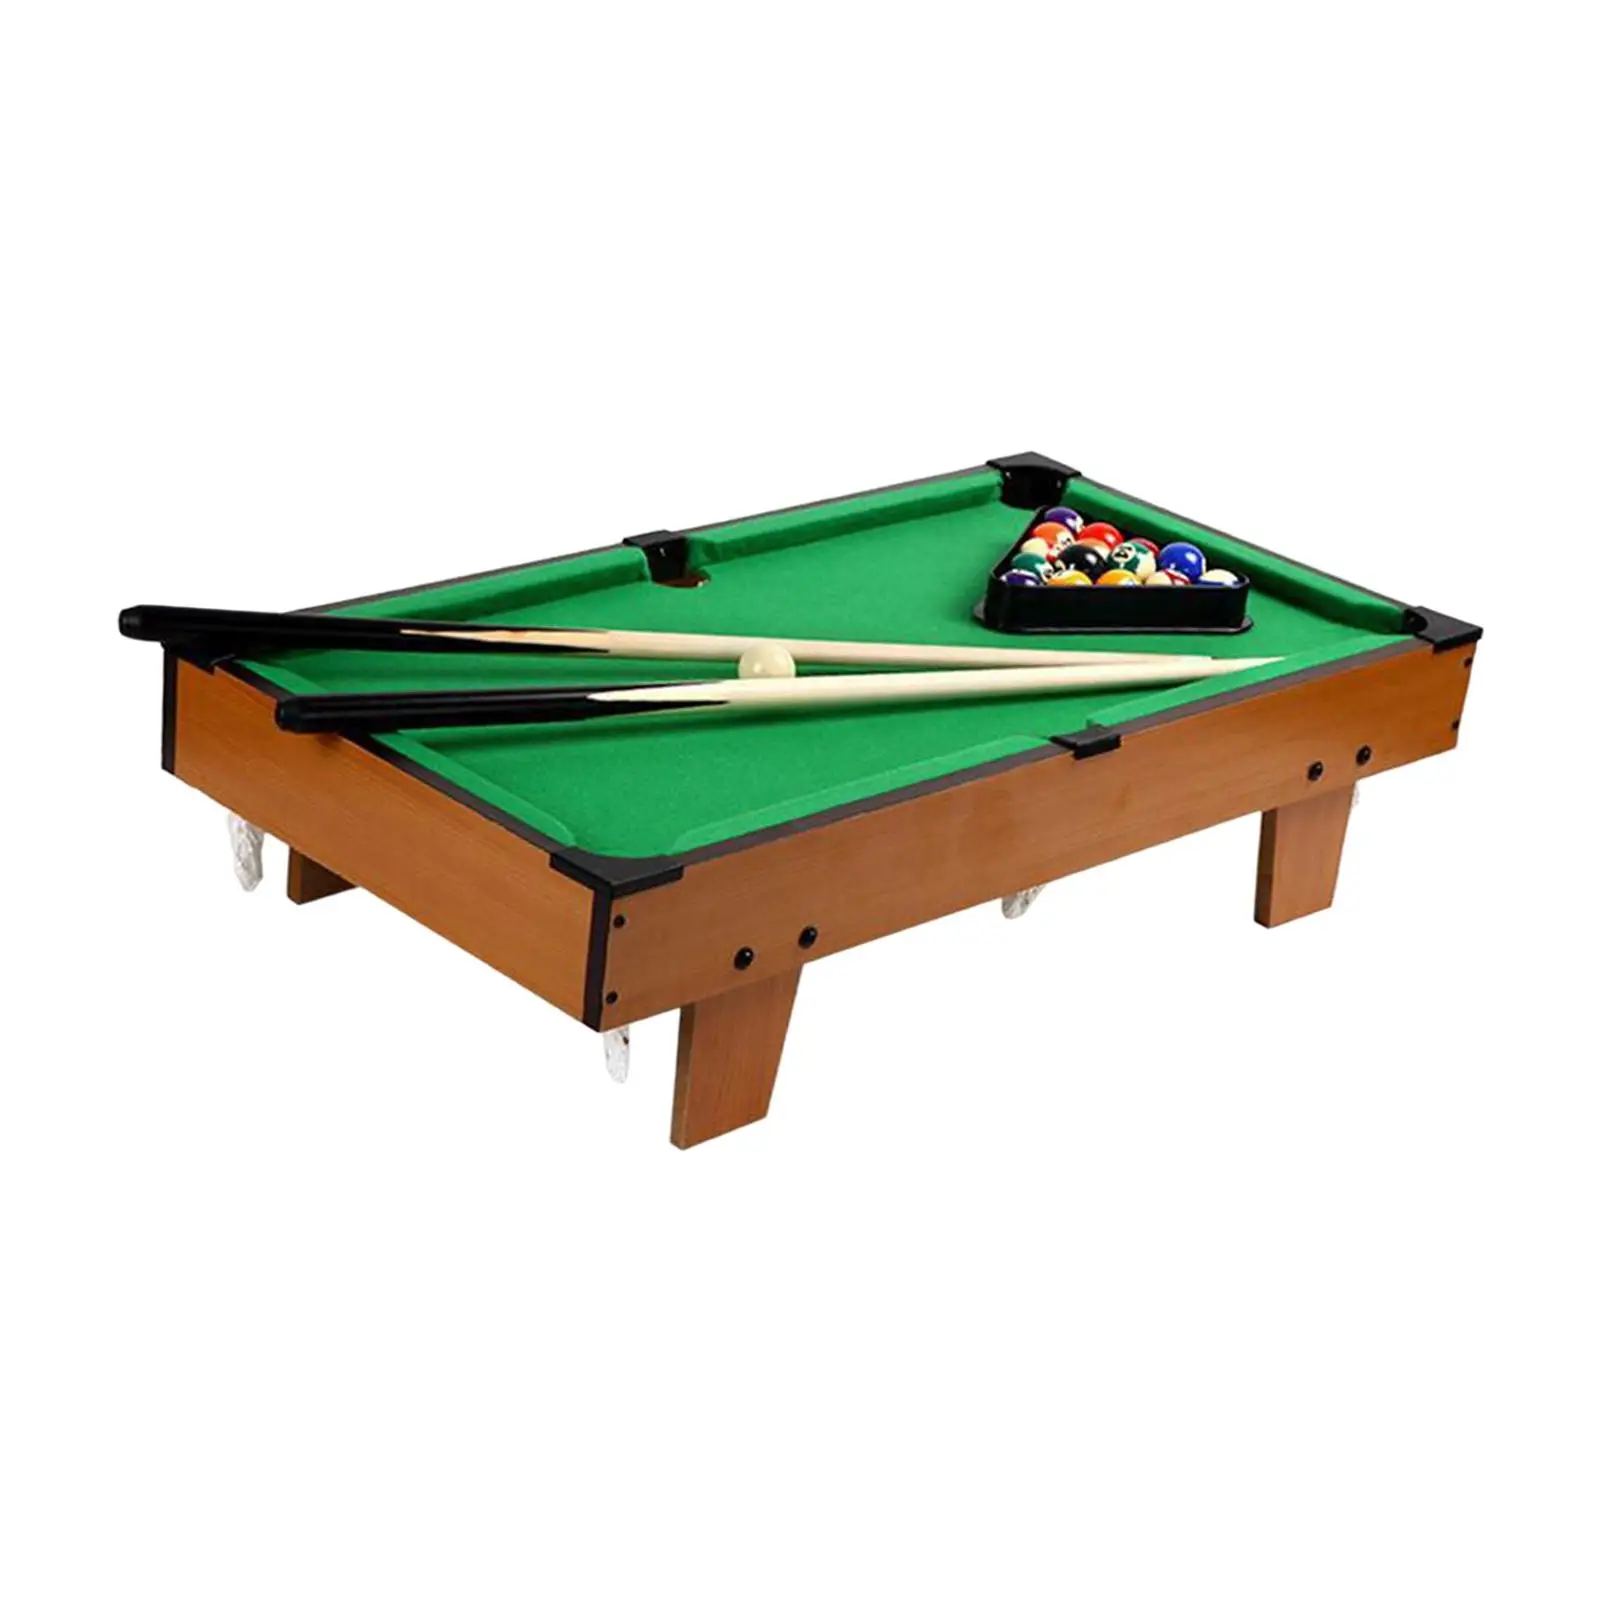 Pool Table Set Game Toy Chalk, Triangle Board Games Billiard